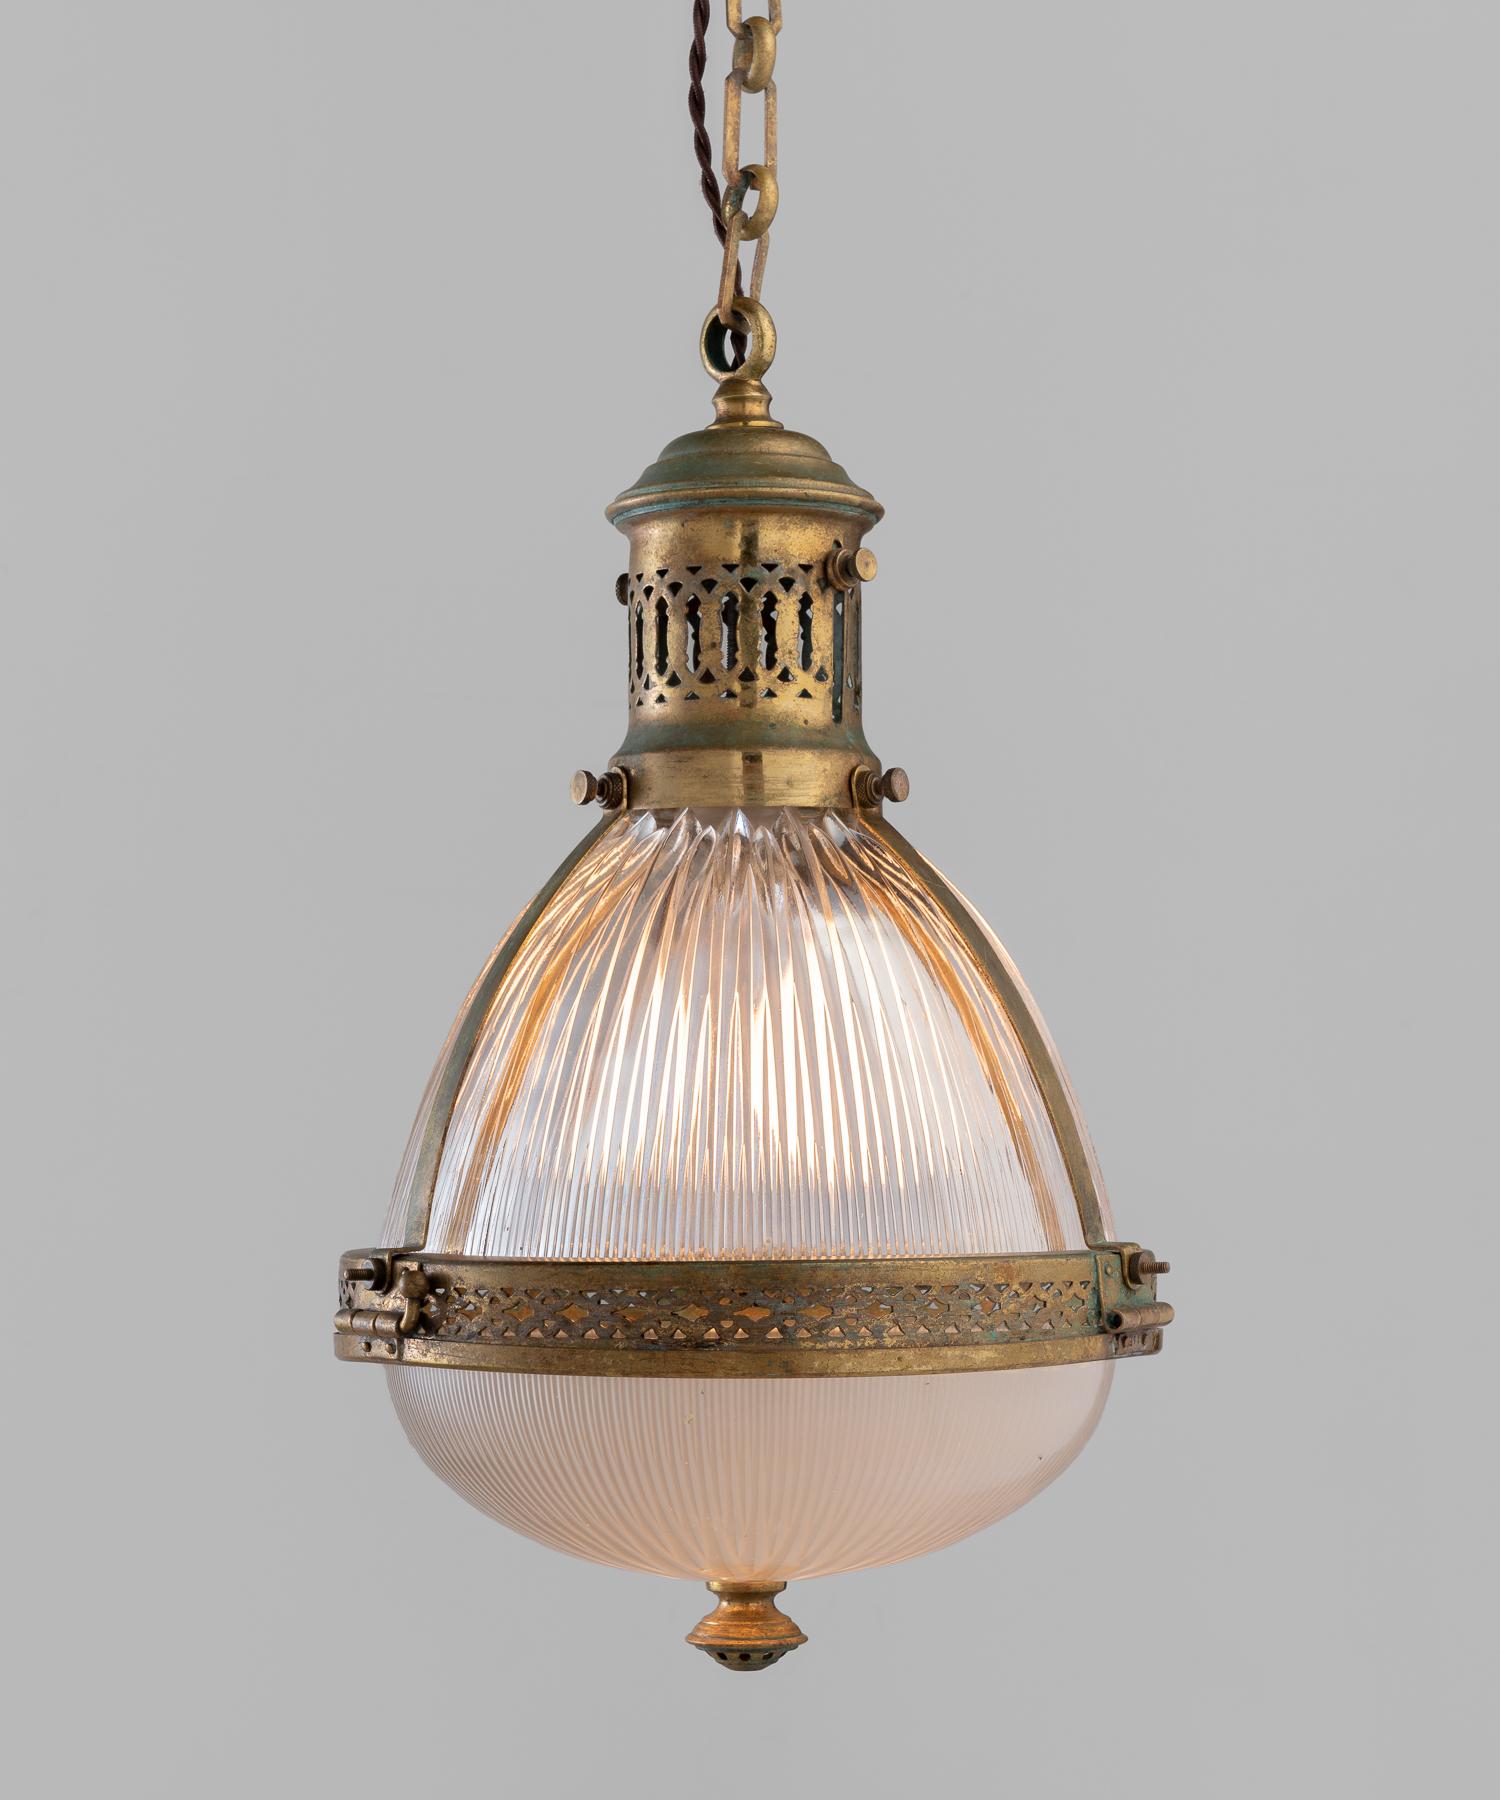 Holophane brass pendant, England, circa 1930

Two-part prismatic Holophane shade with brass hardware. Height includes chain.